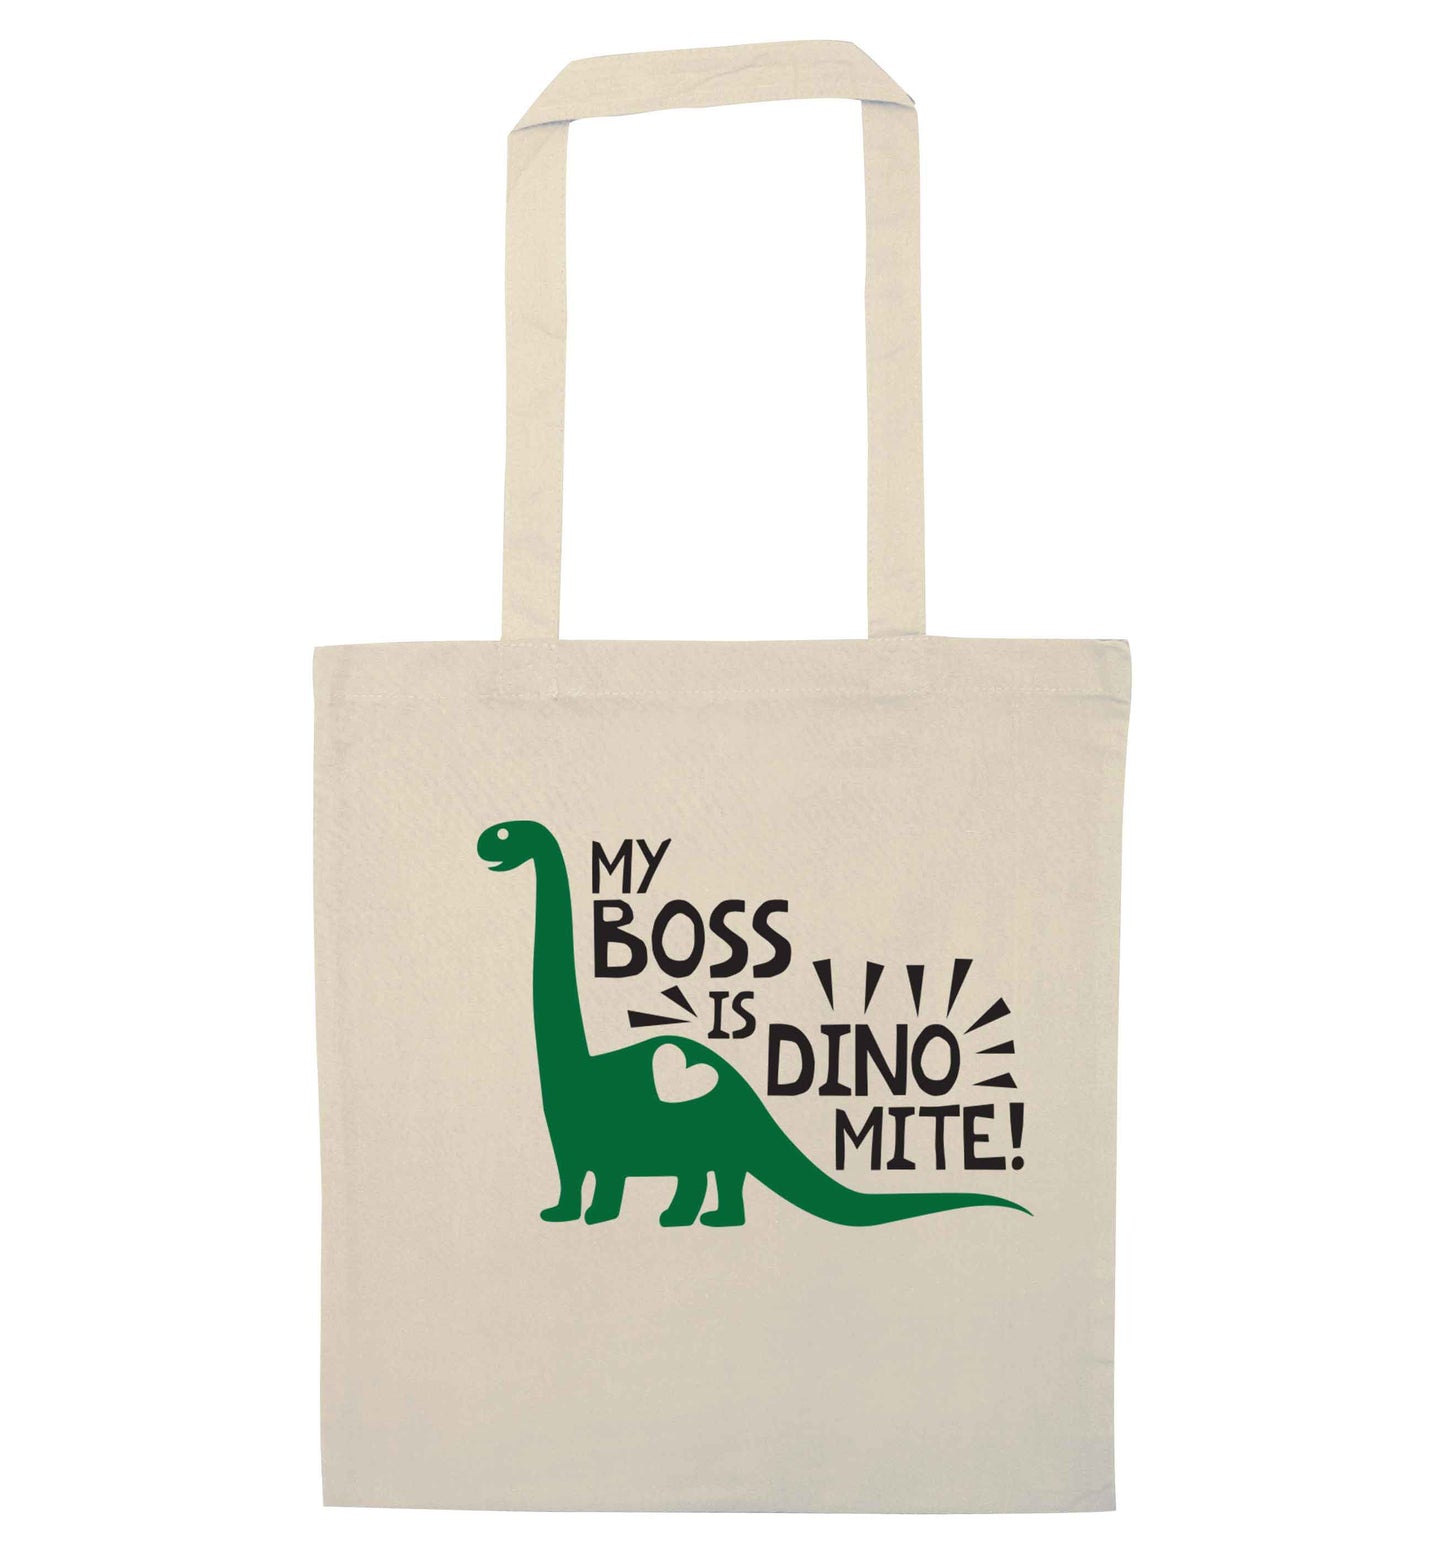 My boss is dinomite! natural tote bag